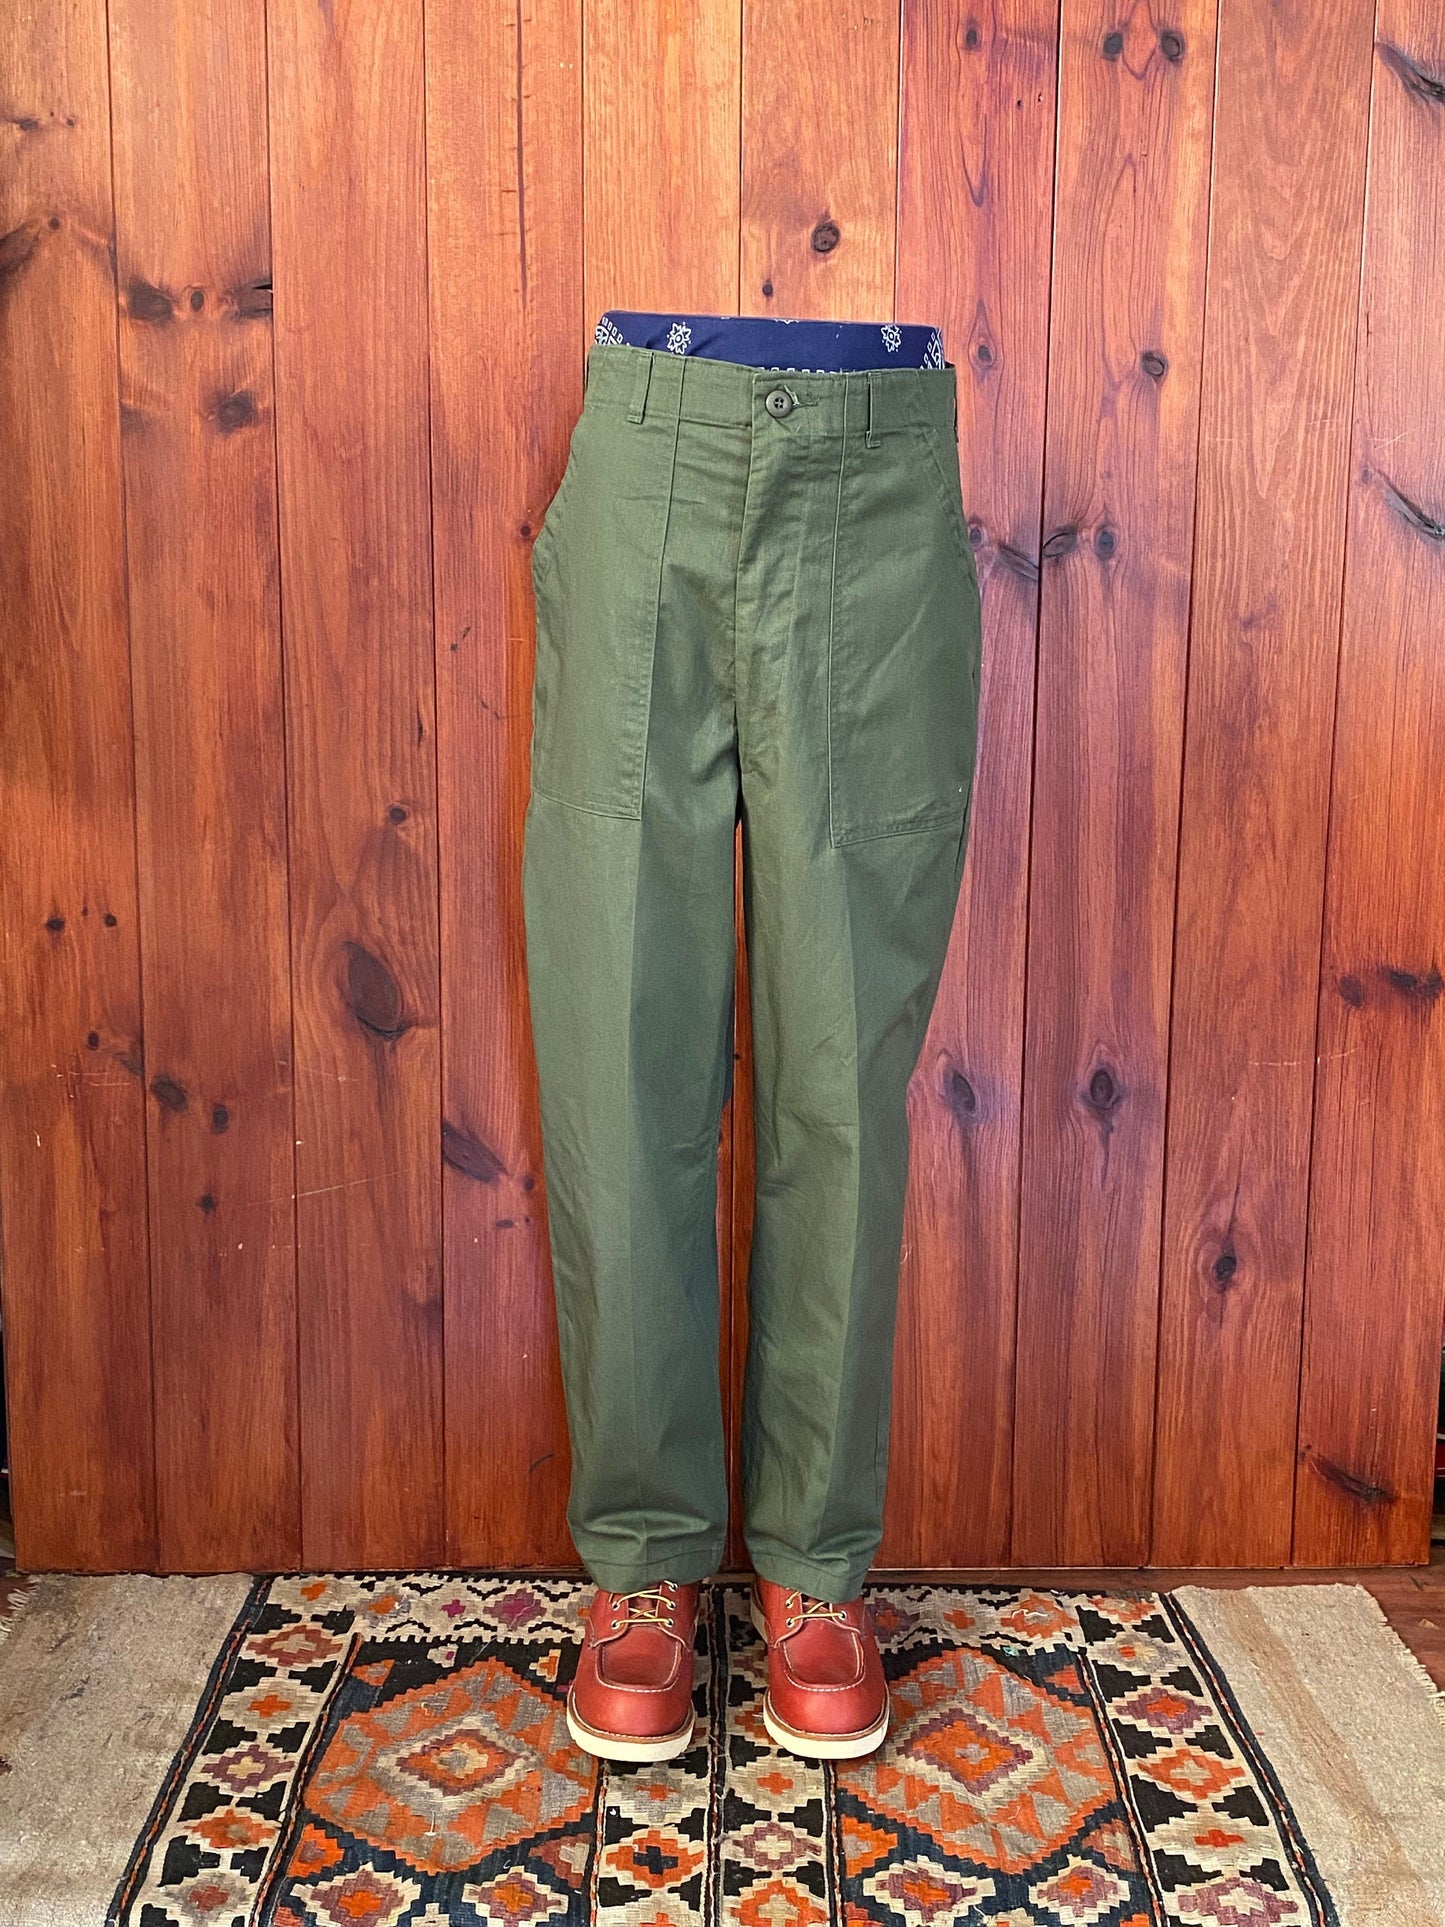 Authentic Vintage 1985 US Army OG-507 Utility Pants/Trousers 31X30 | Classic Military Fatigues